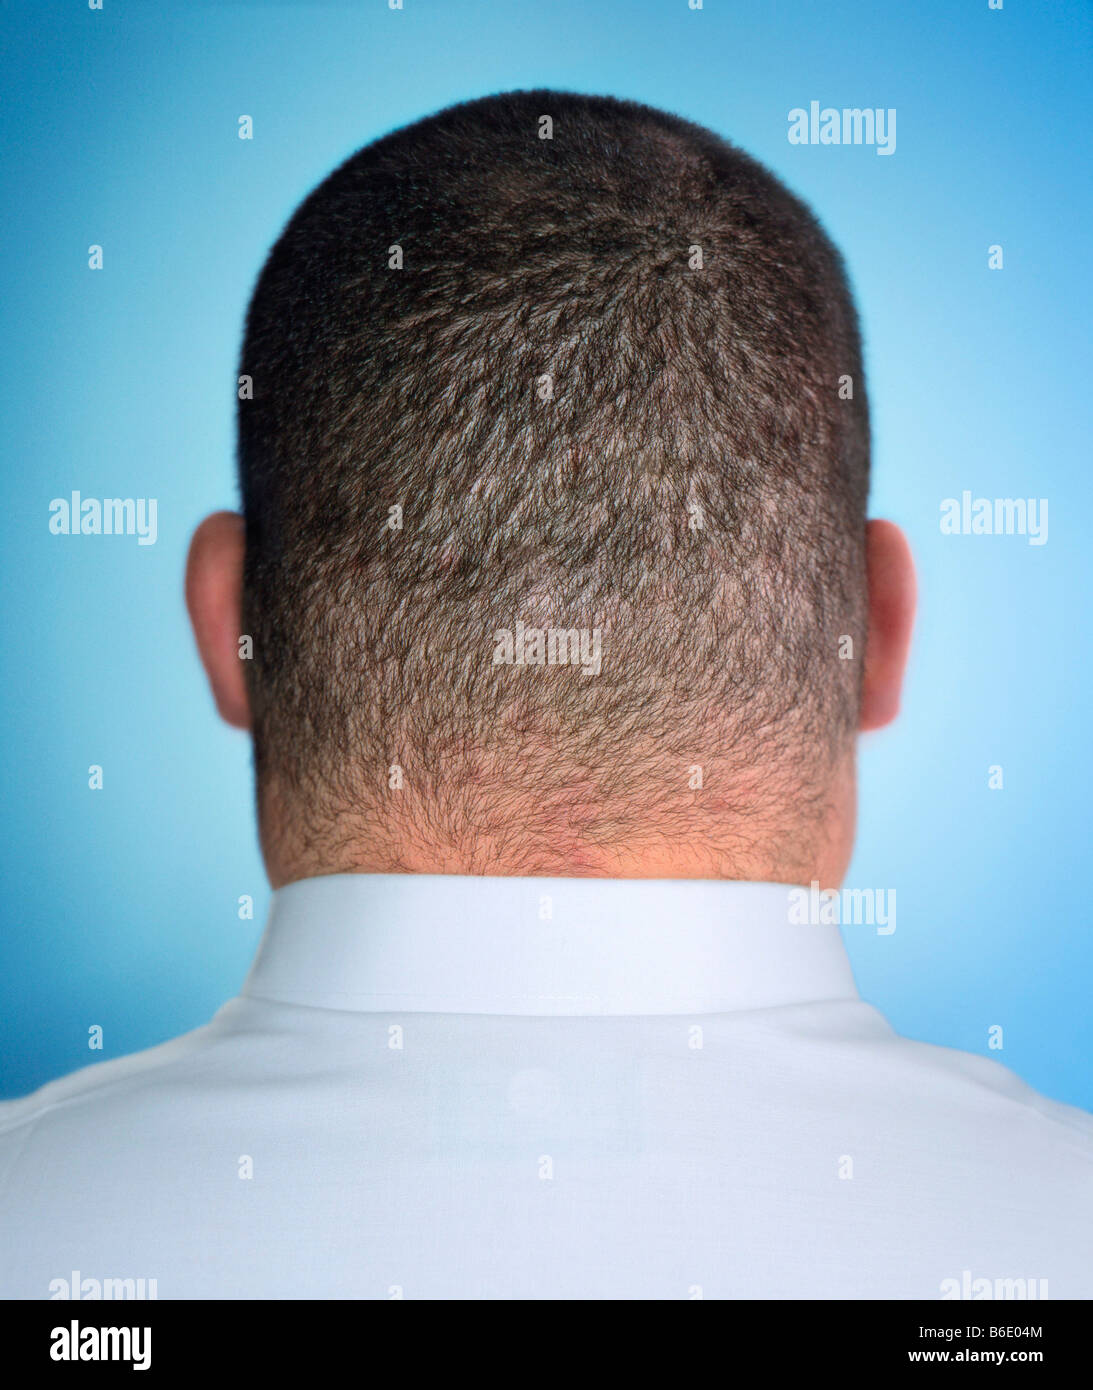 Man seen from behind. Stock Photo